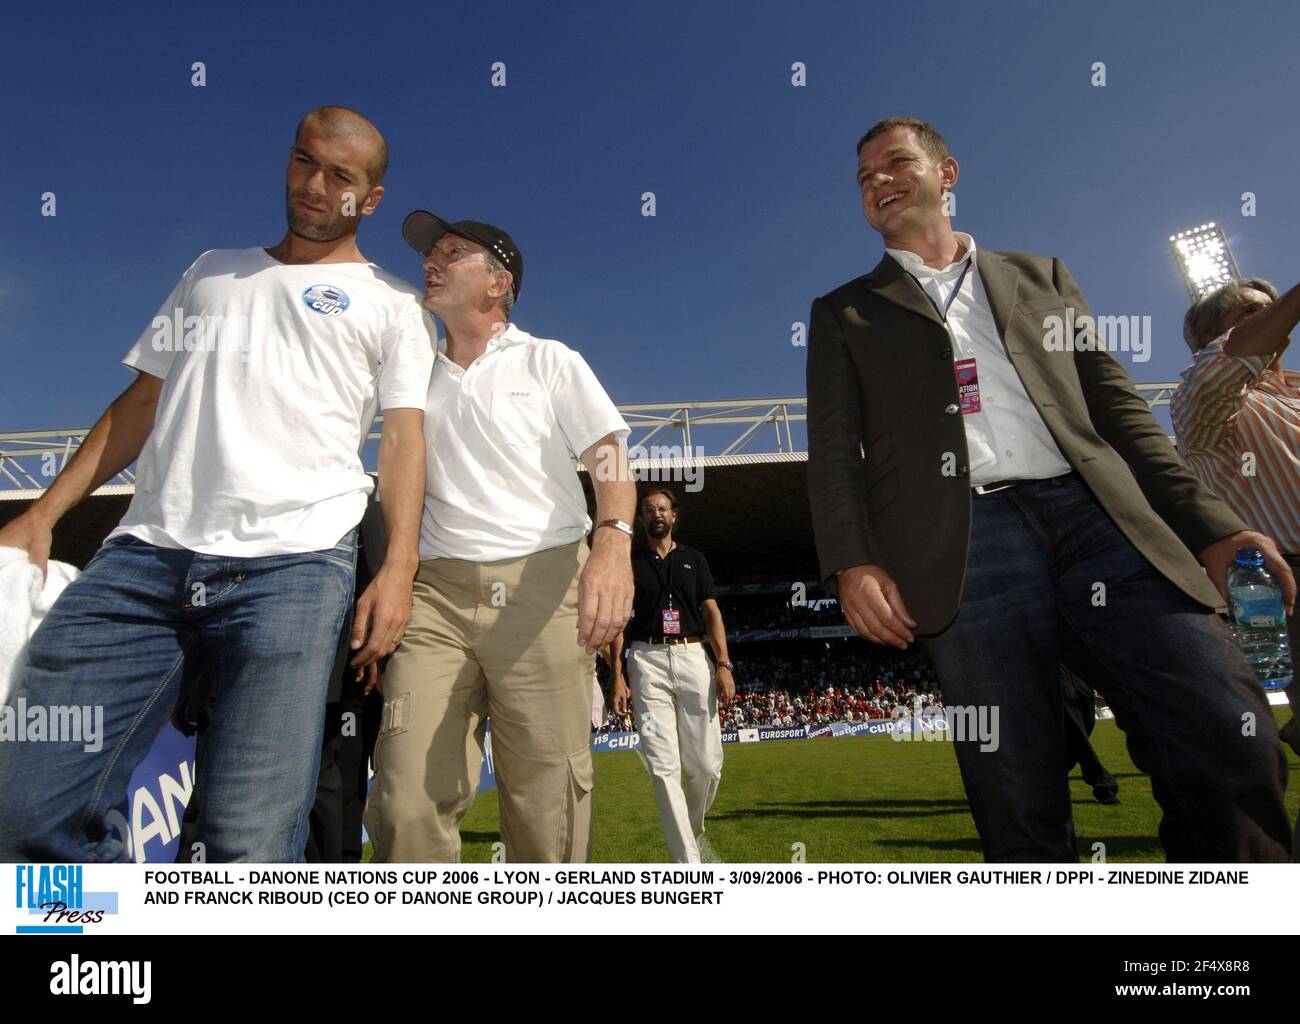 FOOTBALL - DANONE NATIONS CUP 2006 - LYON - GERLAND STADIUM - 3/09/2006 - PHOTO: OLIVIER GAUTHIER / DPPI - ZINEDINE ZIDANE AND FRANCK RIBOUD (CEO OF DANONE GROUP) / JACQUES BUNGERT Stock Photo